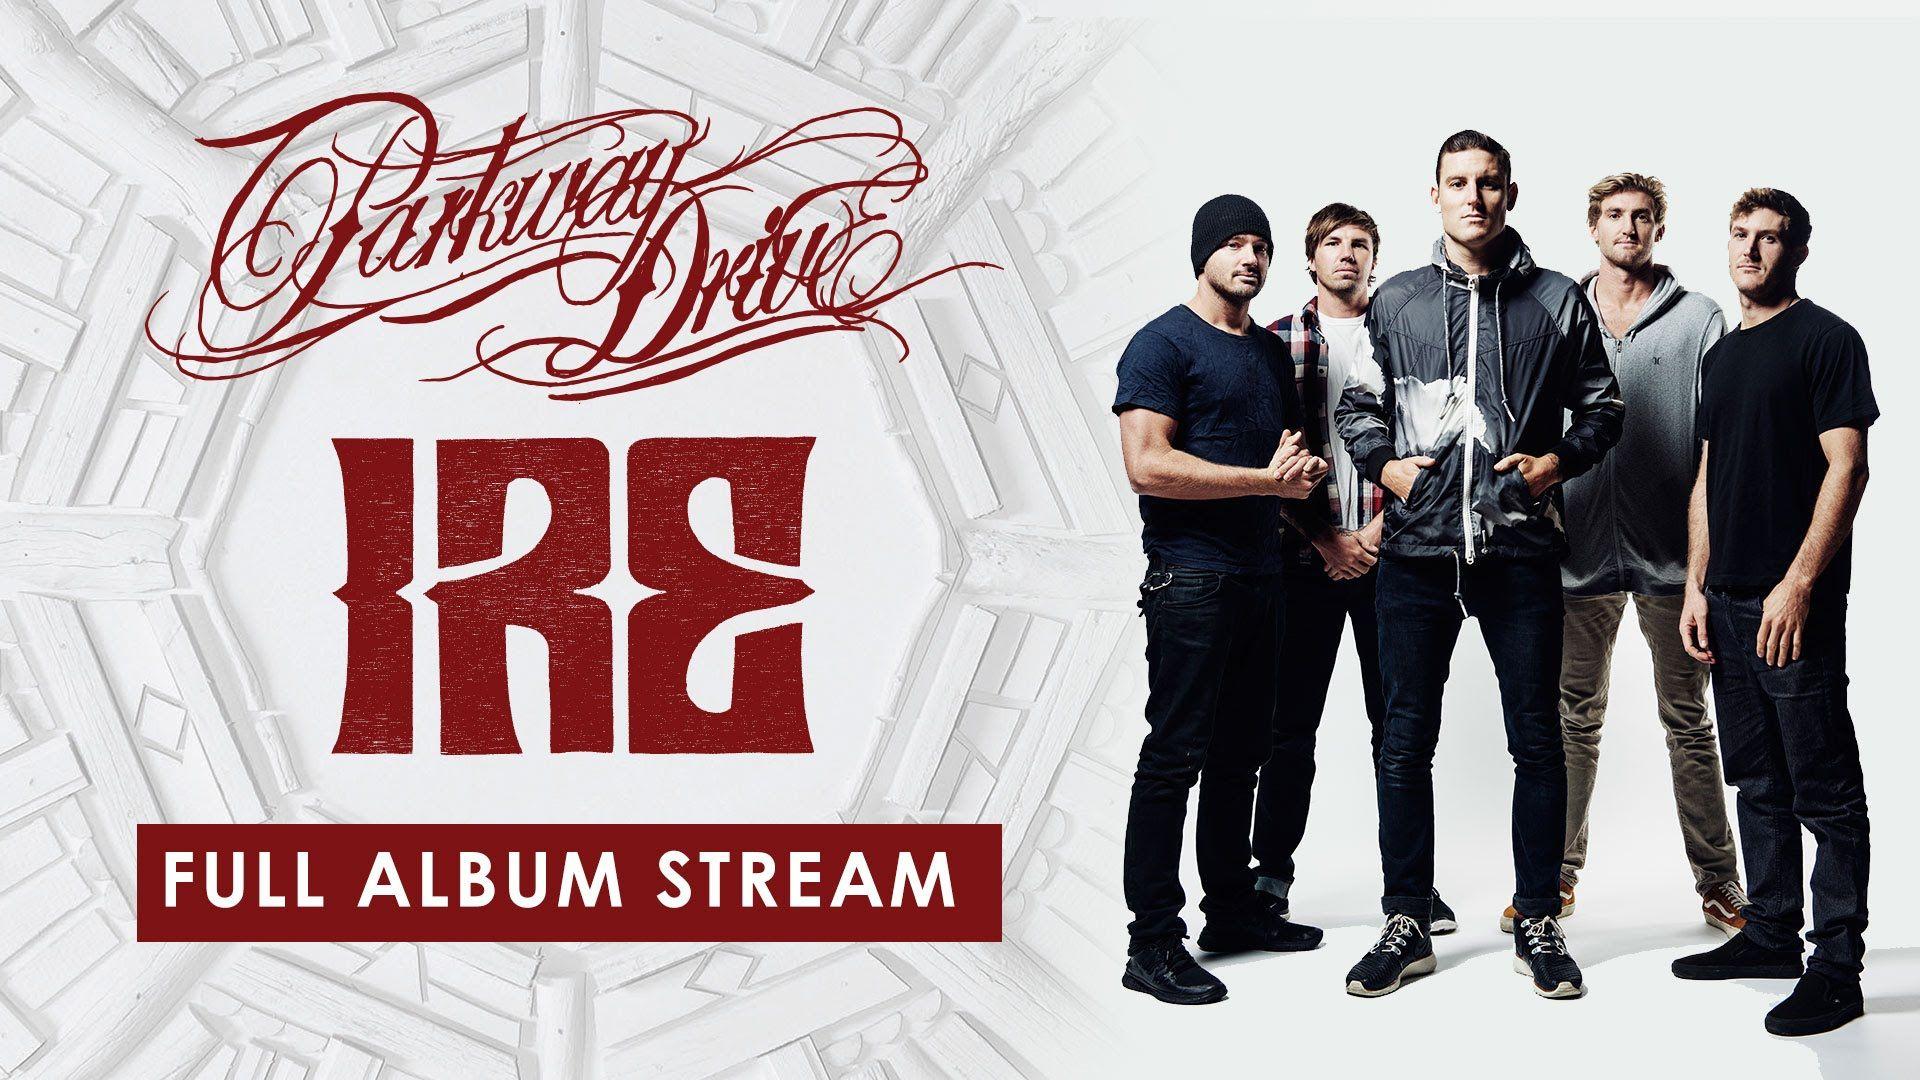 Parkway Drive on the Wall (Full Album Stream)